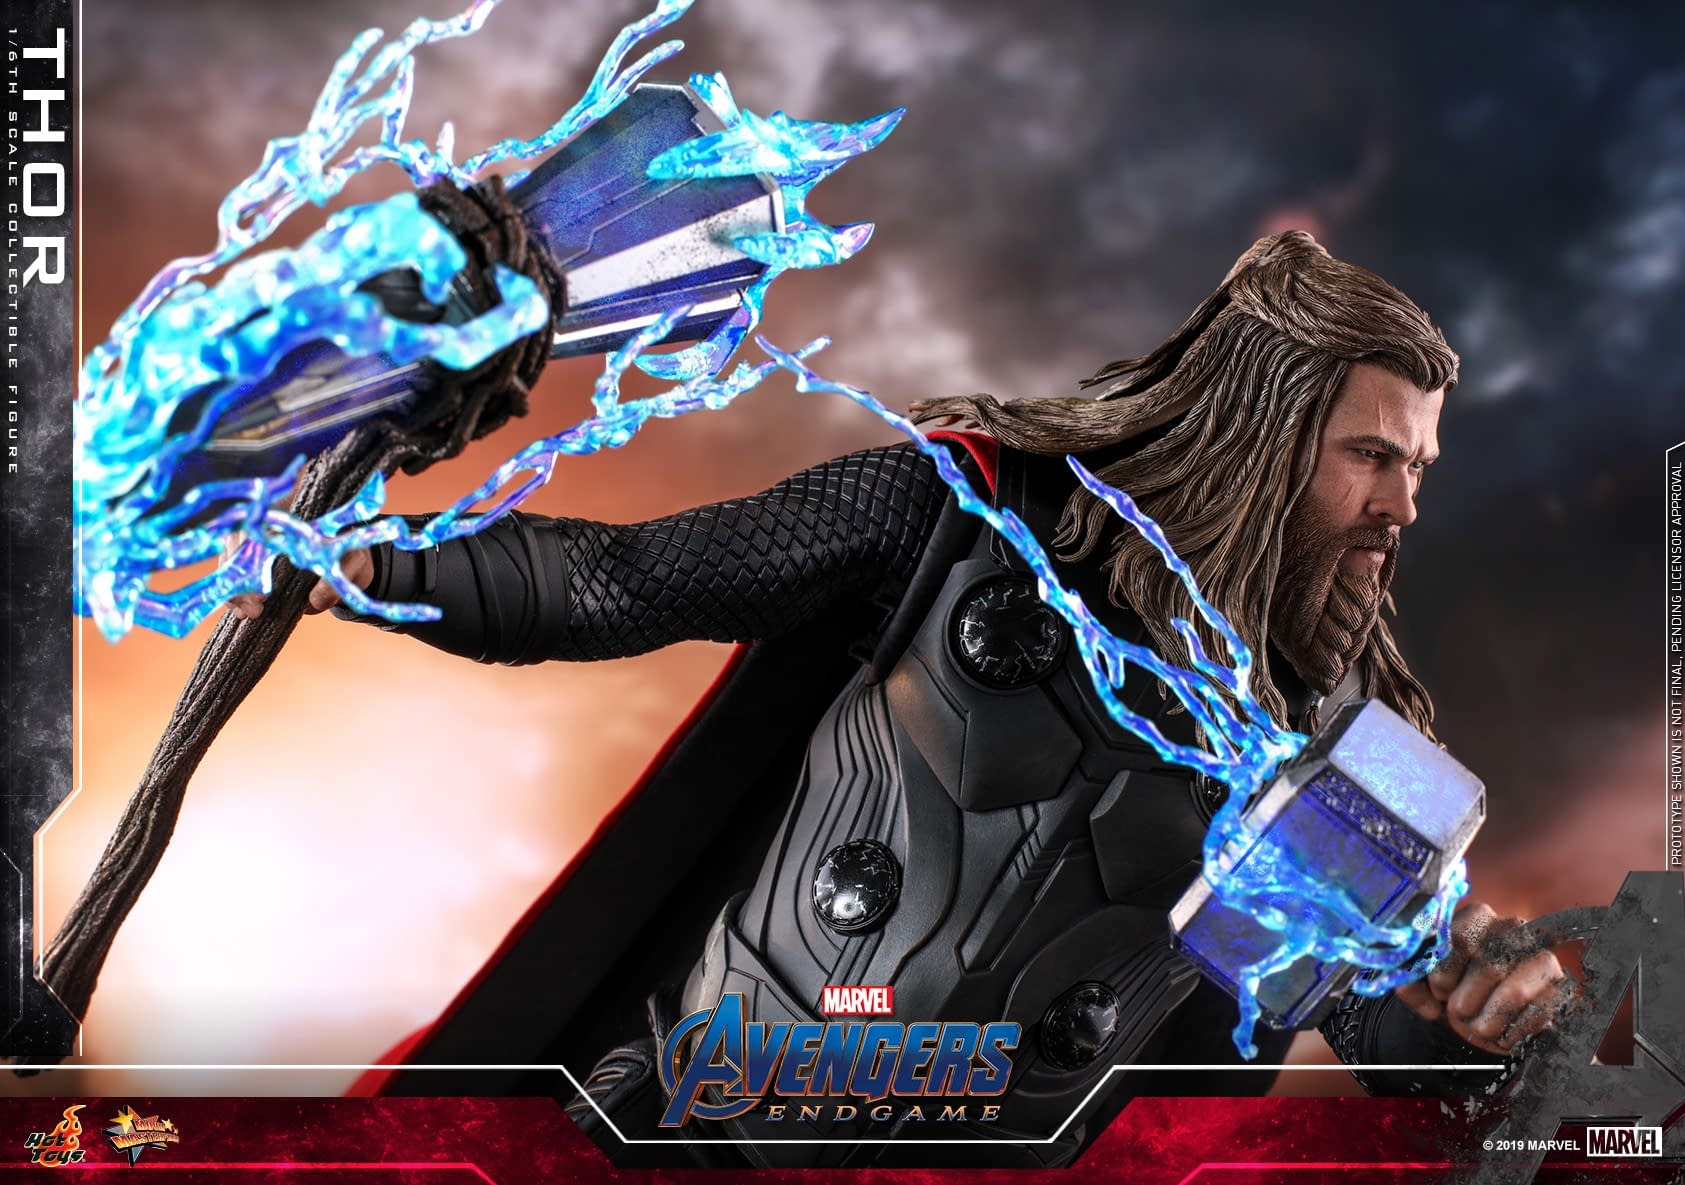 Thor Is Still Worthy in Upcoming New Hot Toys Figure